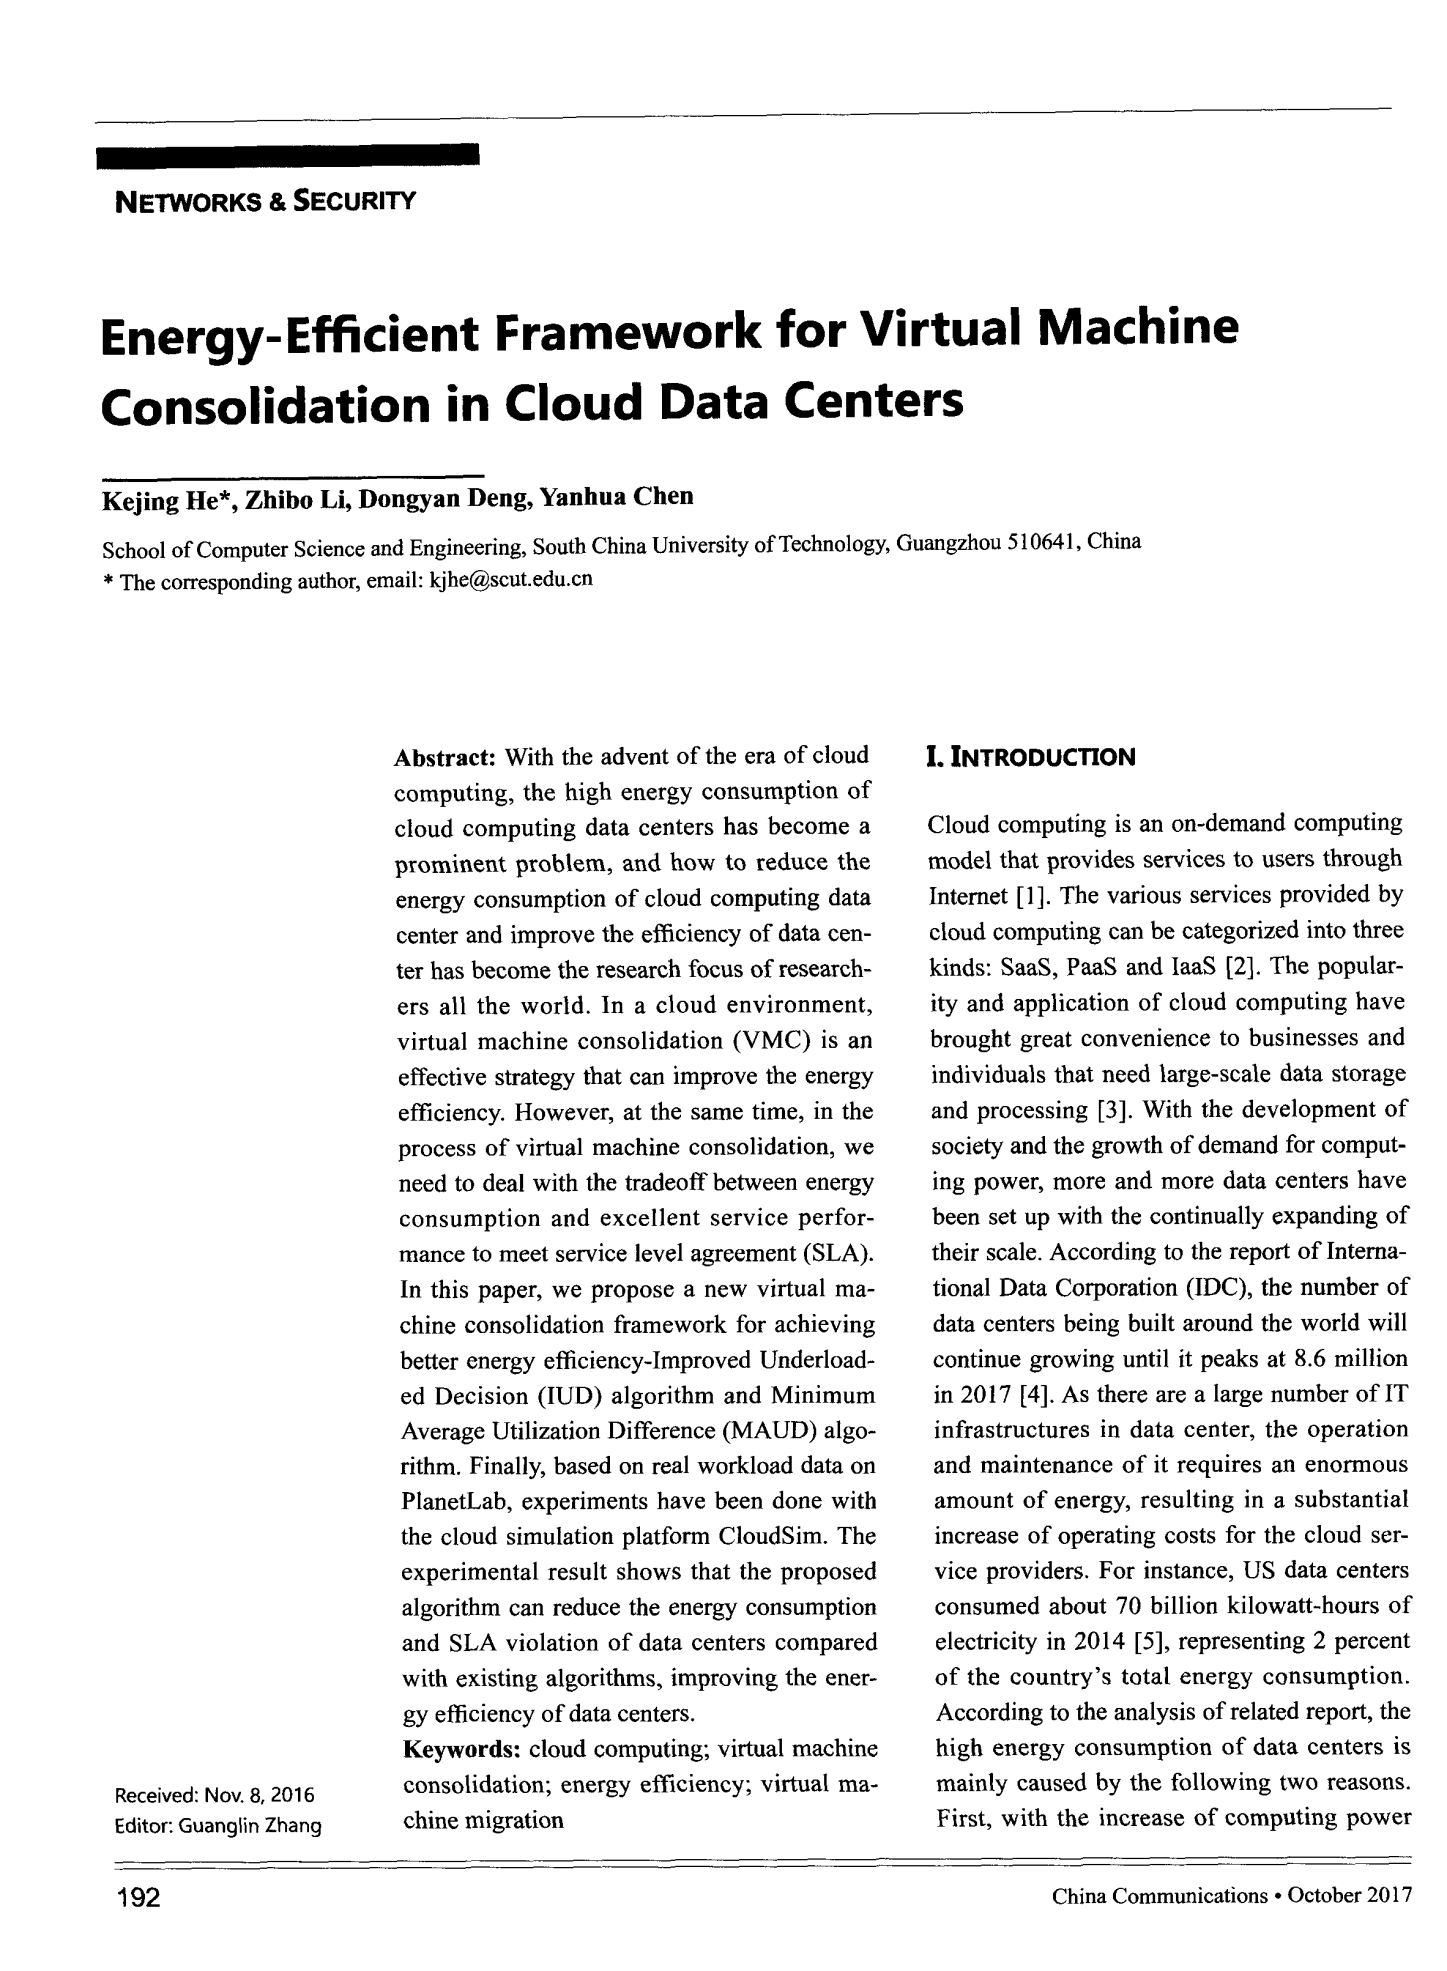 Energy-Efficient Framework for Virtual Machine Consolidation in Cloud Data Centers